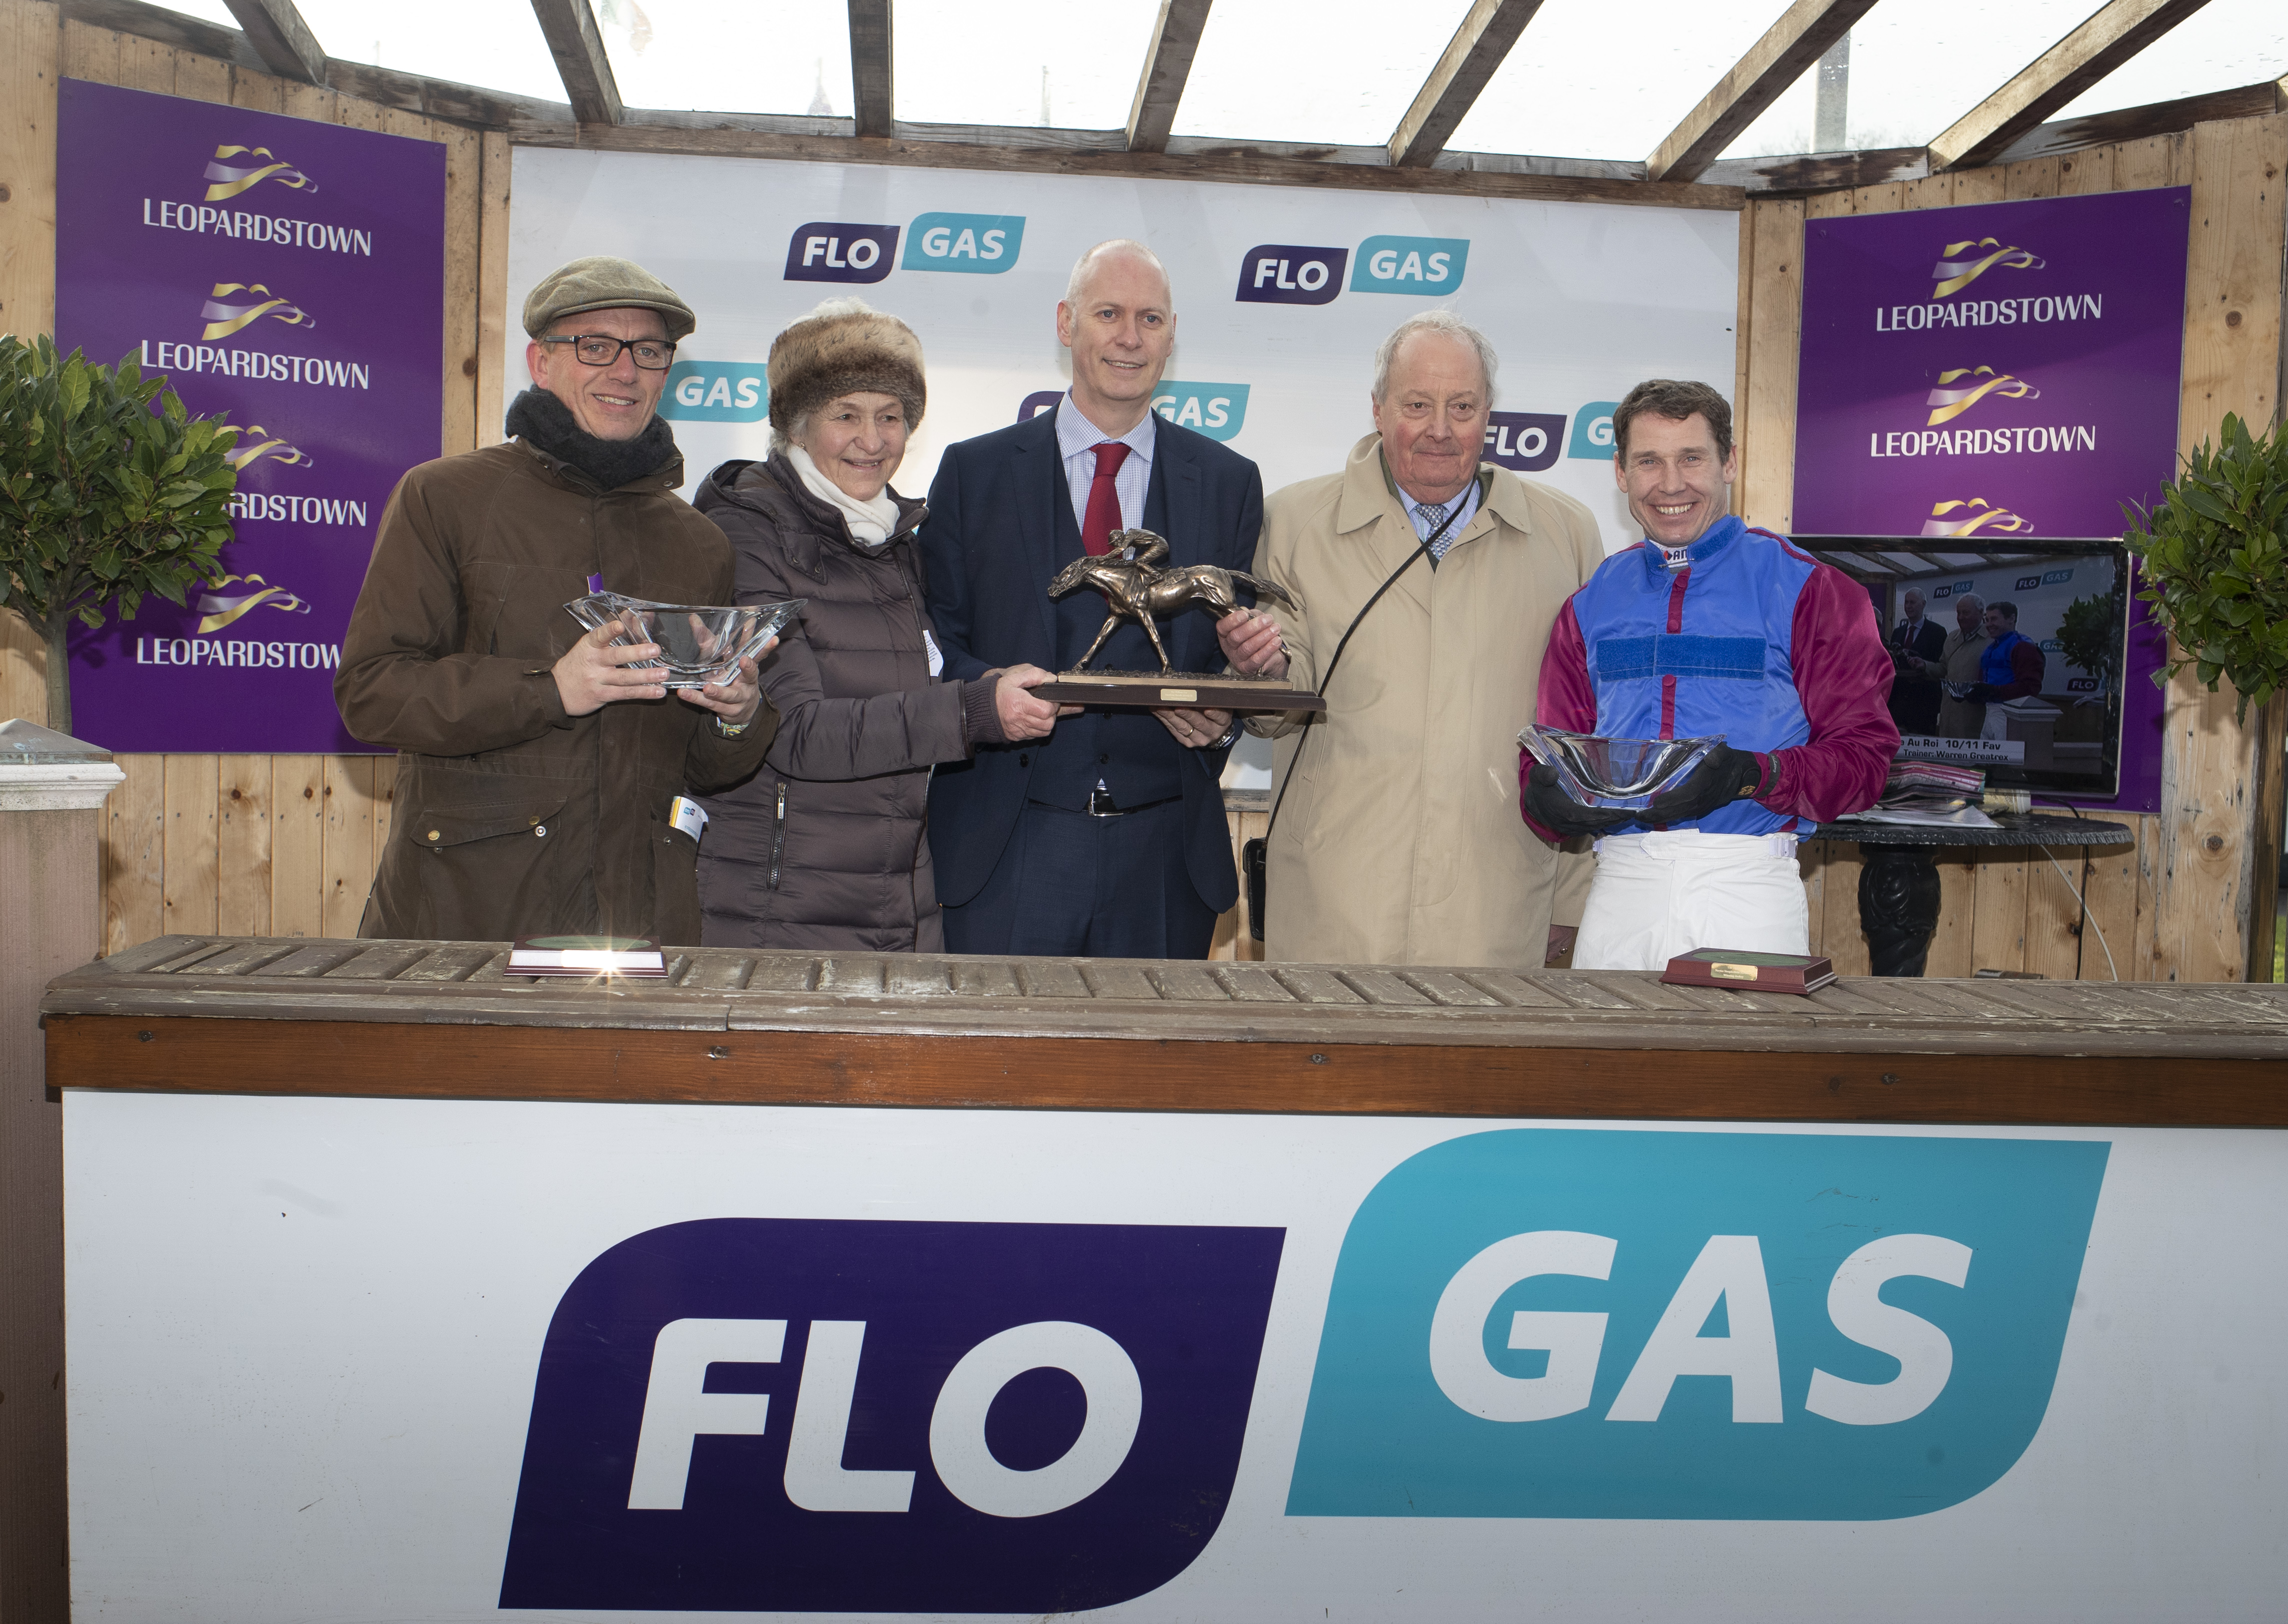 John Rooney(centre), managing director,  Flogas Ireland presents the trophies for the Grade 1 Flogas Novice Chase in the Dublin Racing Festival at Leopardstown to (l-r) trainer Warren Greatrix (Trainer), owners Nicky Turner and Andrew Merriam and jockey Richard Johnson OBE on Sunday 3rd February 2019